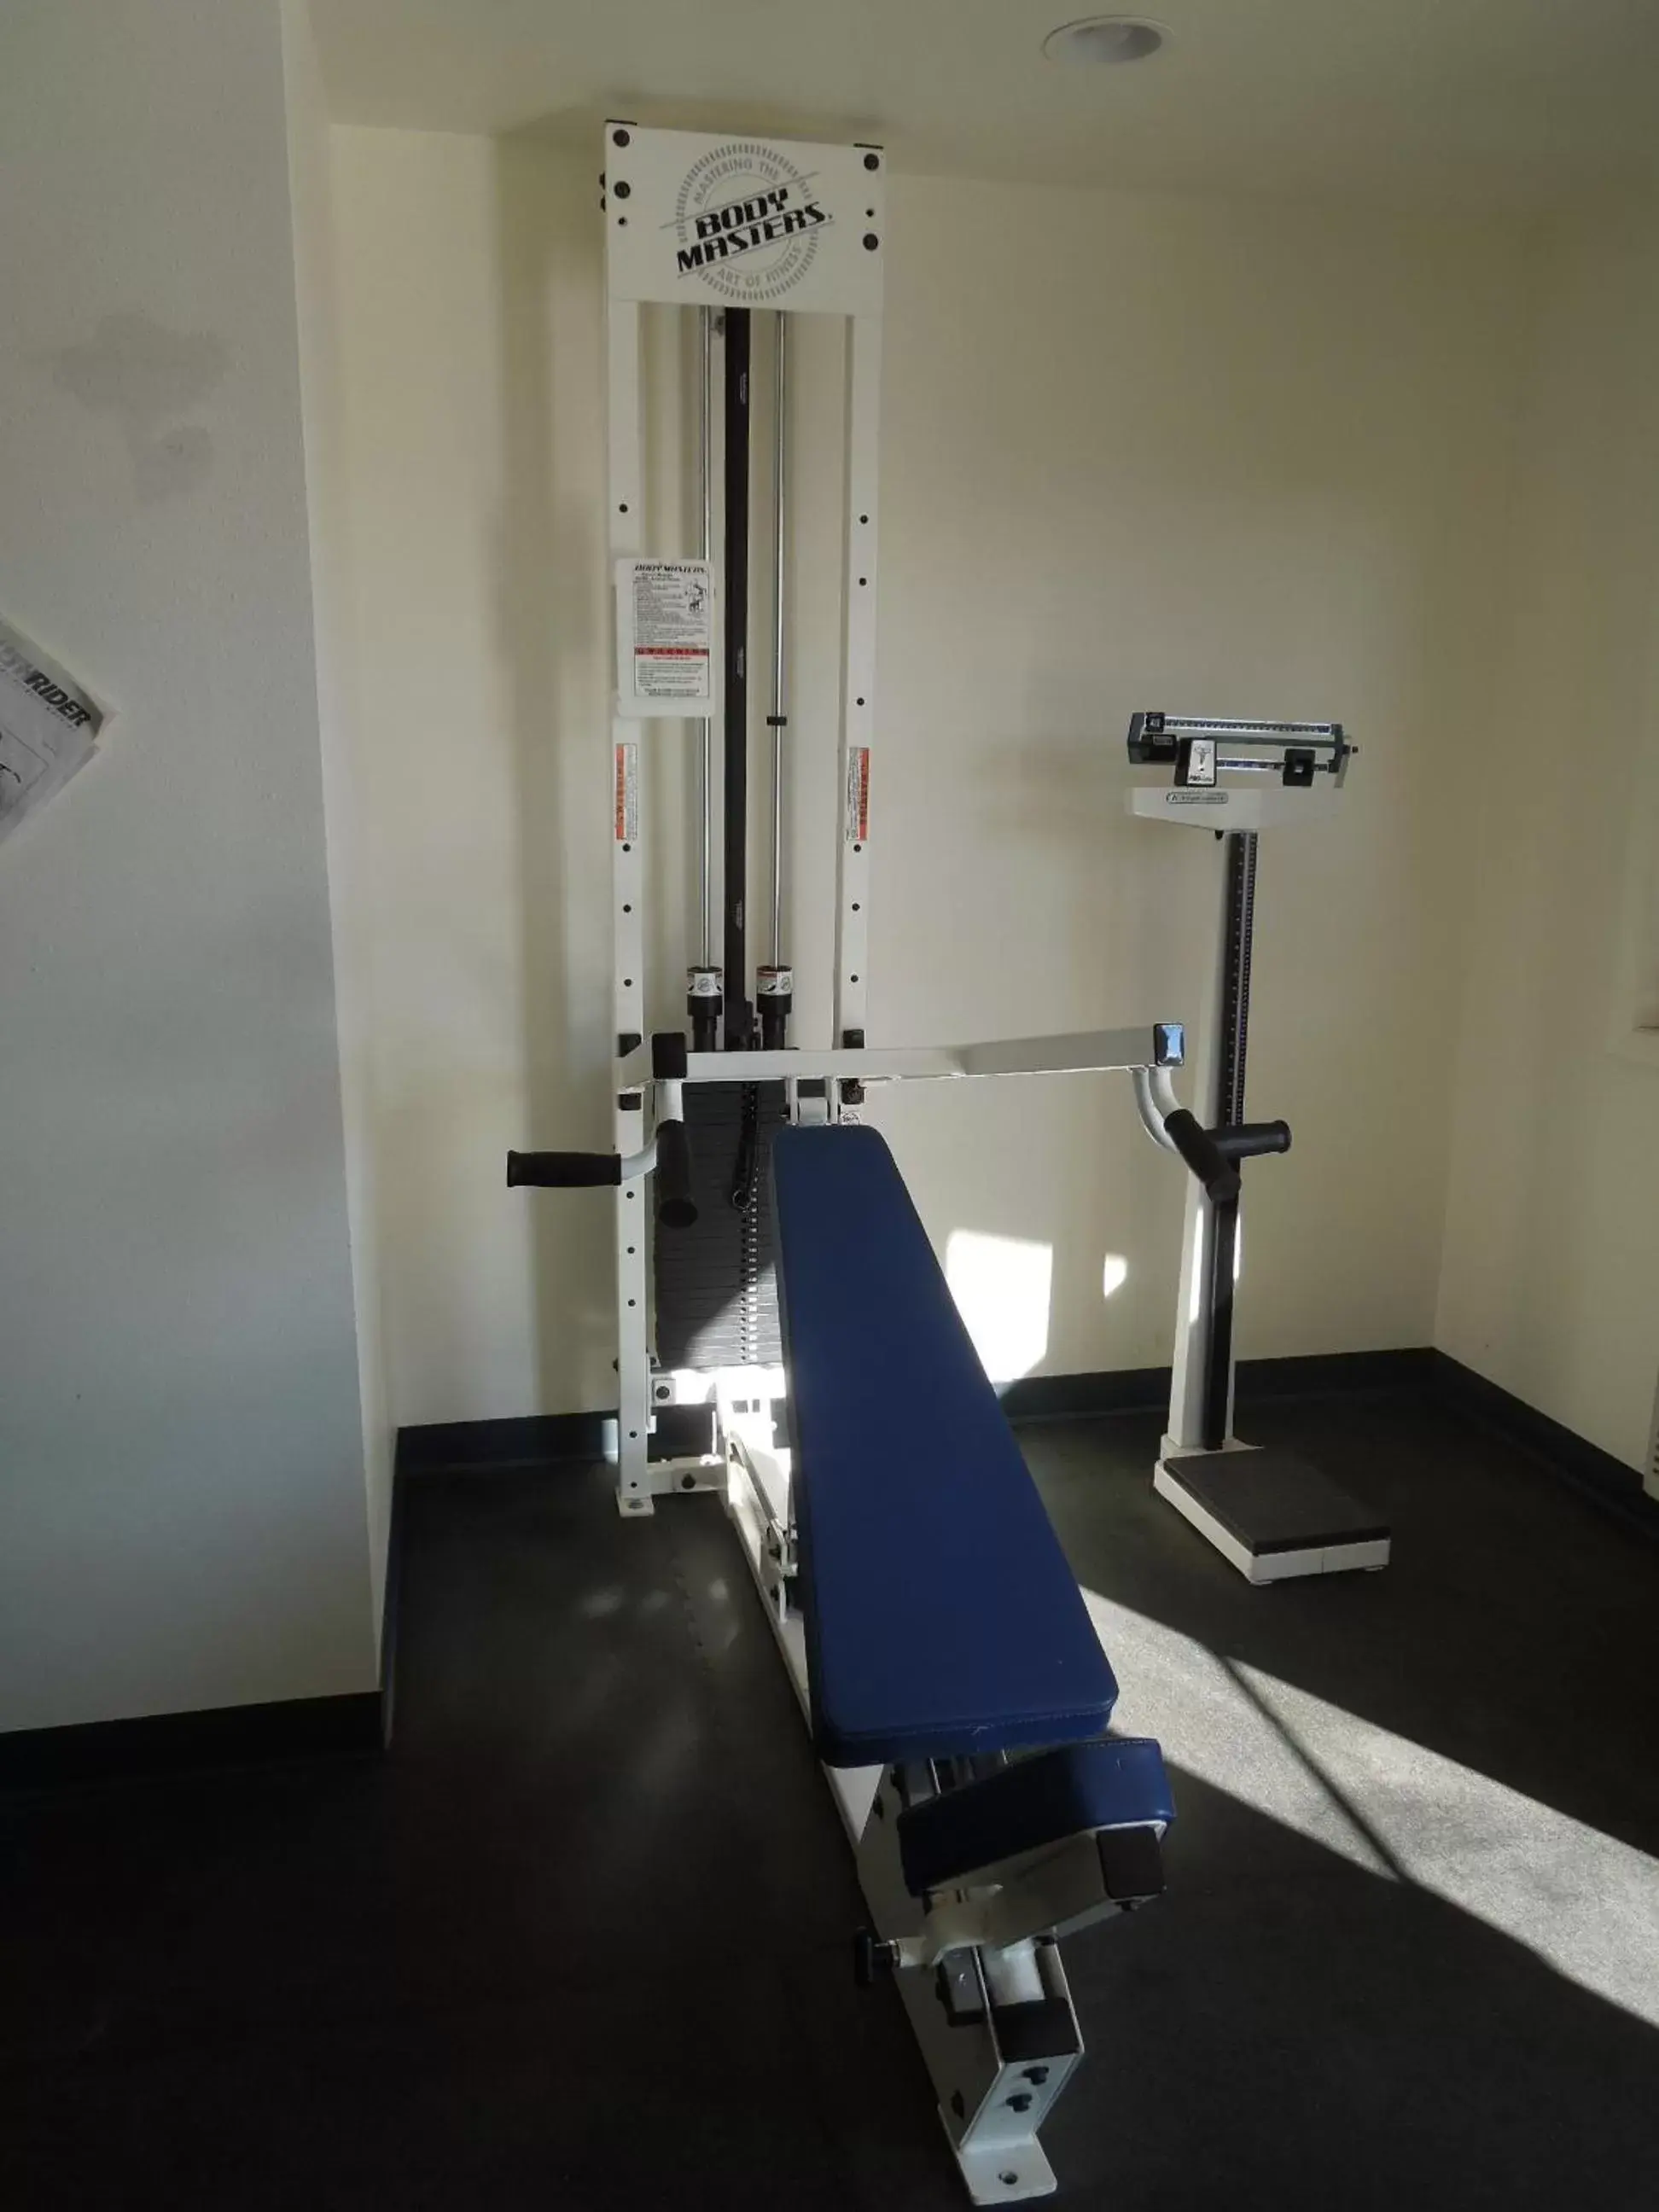 Fitness centre/facilities, Fitness Center/Facilities in Inn at Lander, Travelodge by Wyndham